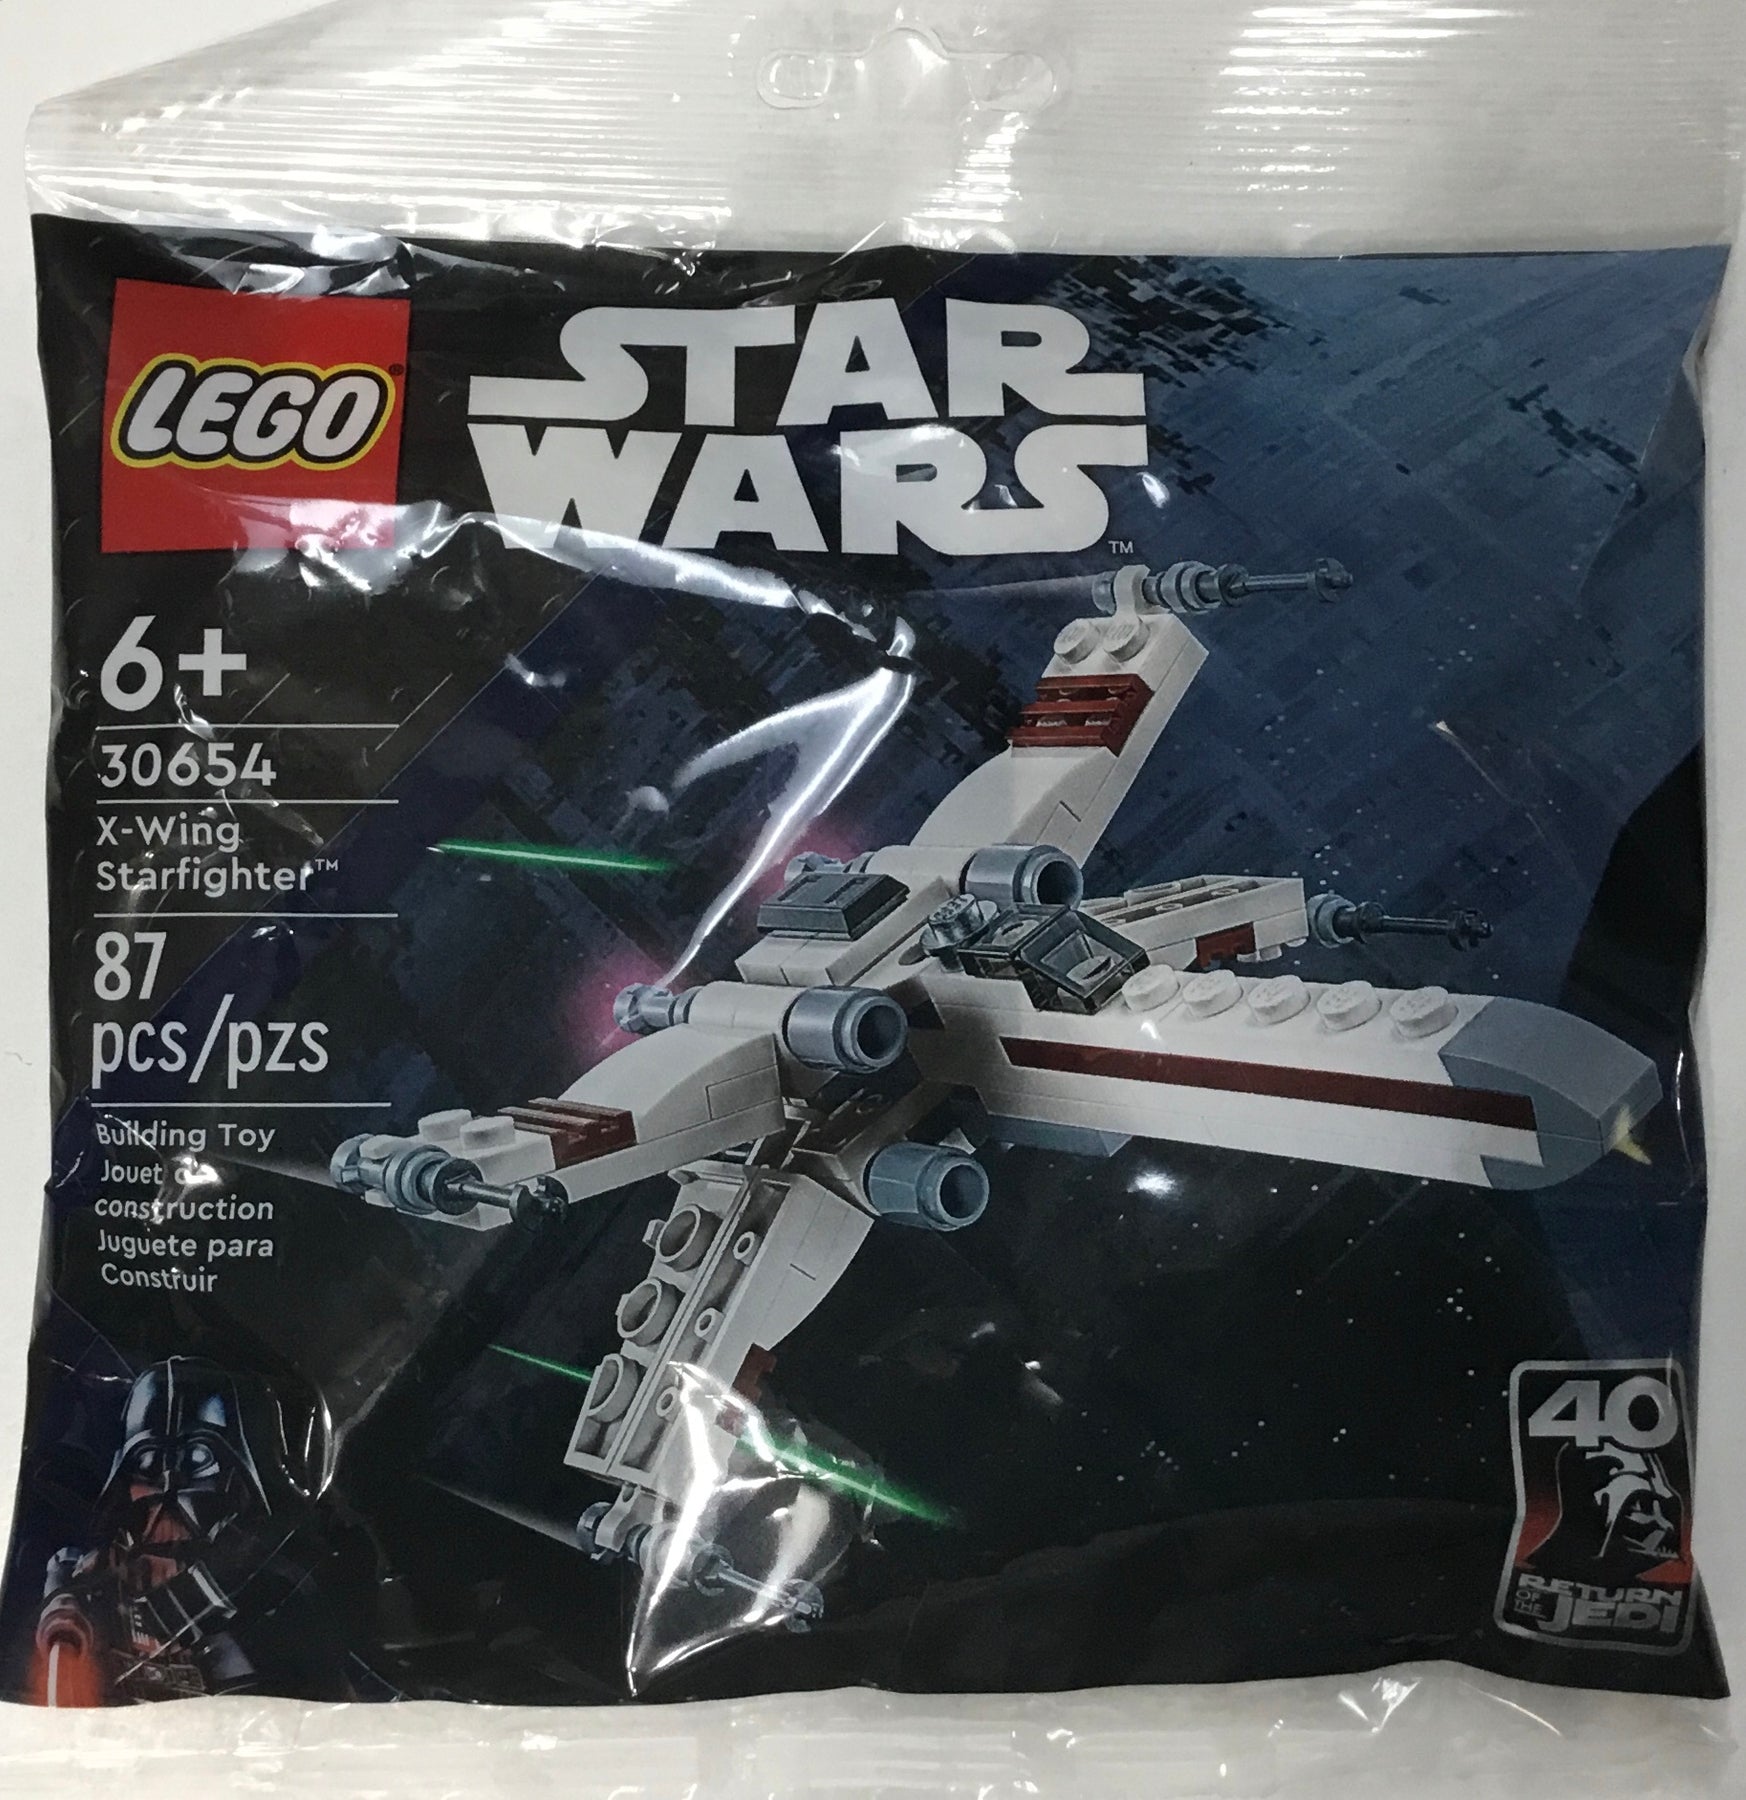 LEGO 6212 Star Wars X-Wing Fighter 100% Complete 6 Figures, Instructions,  Box